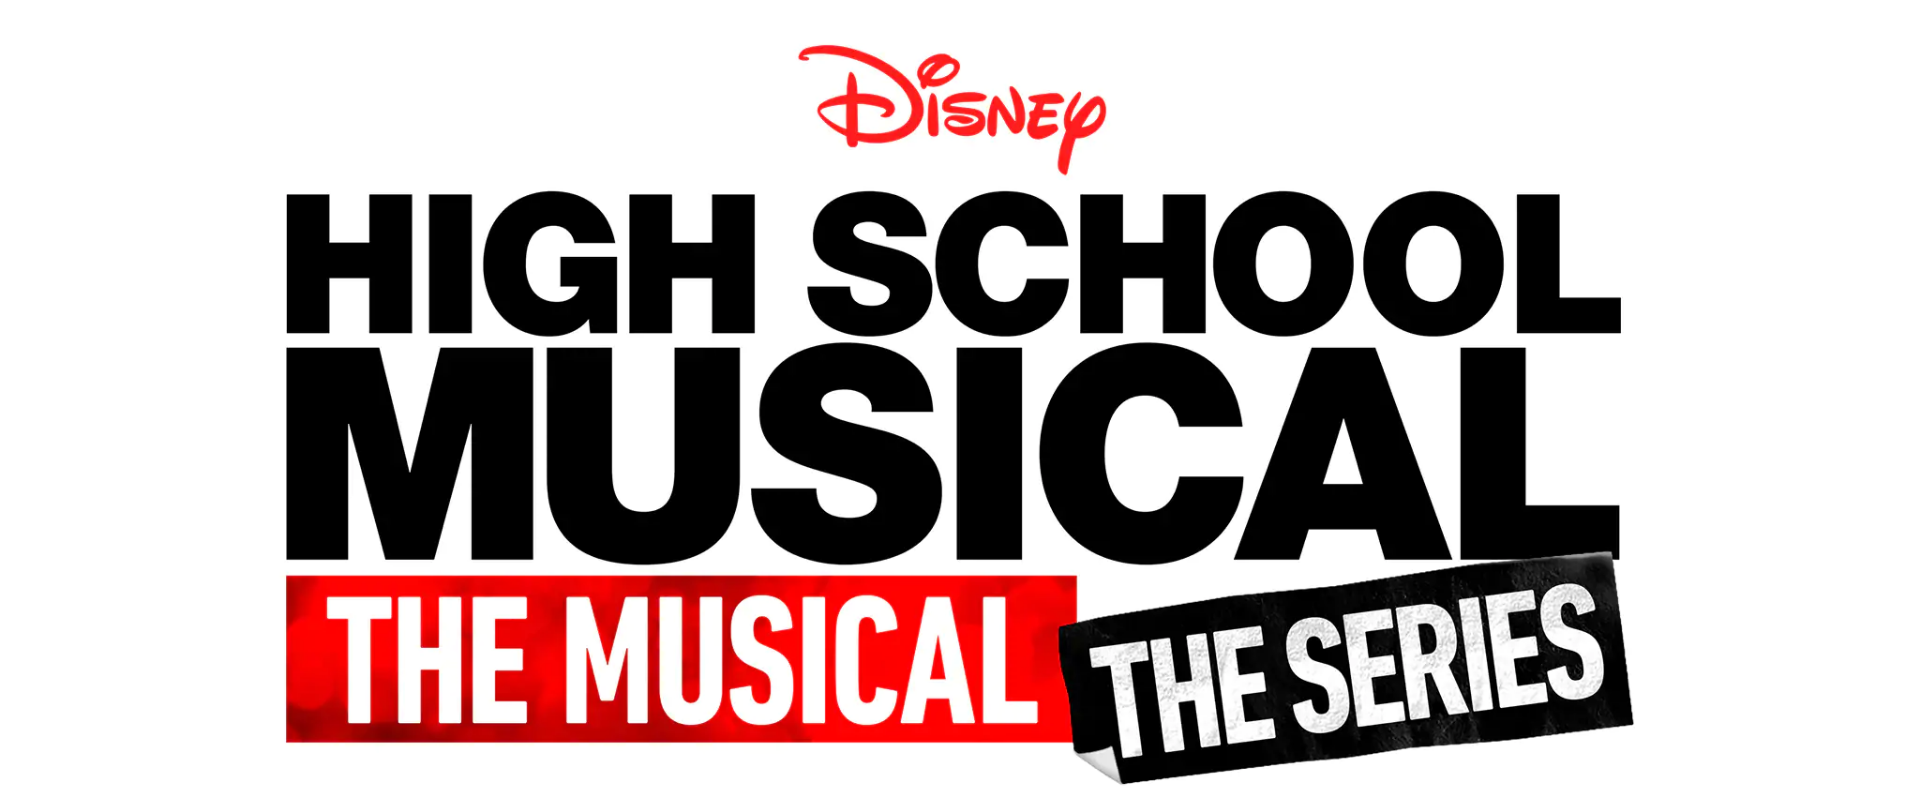 High School Musical The Musical Logo.png